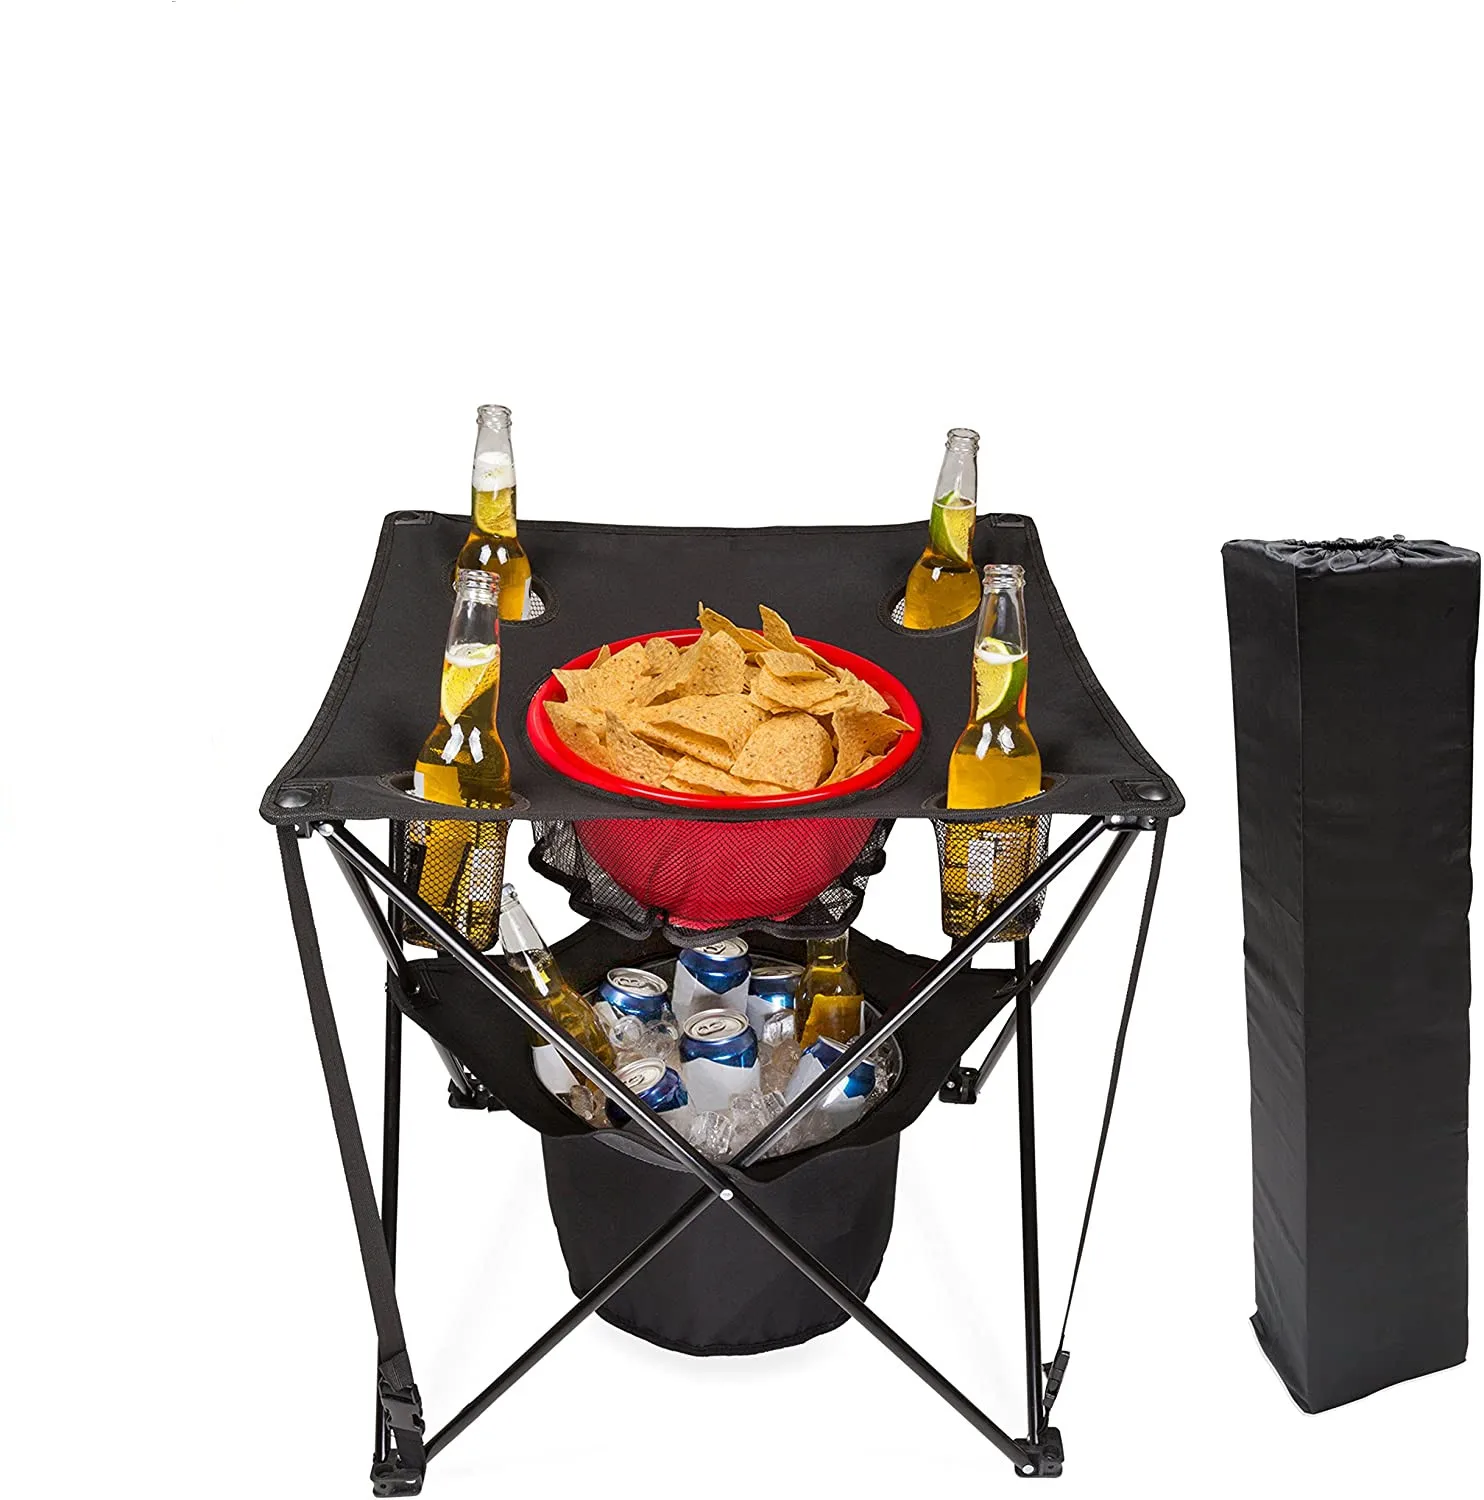 

Portable bbq Camping Picnic Folding Table With Cooler, Customizable